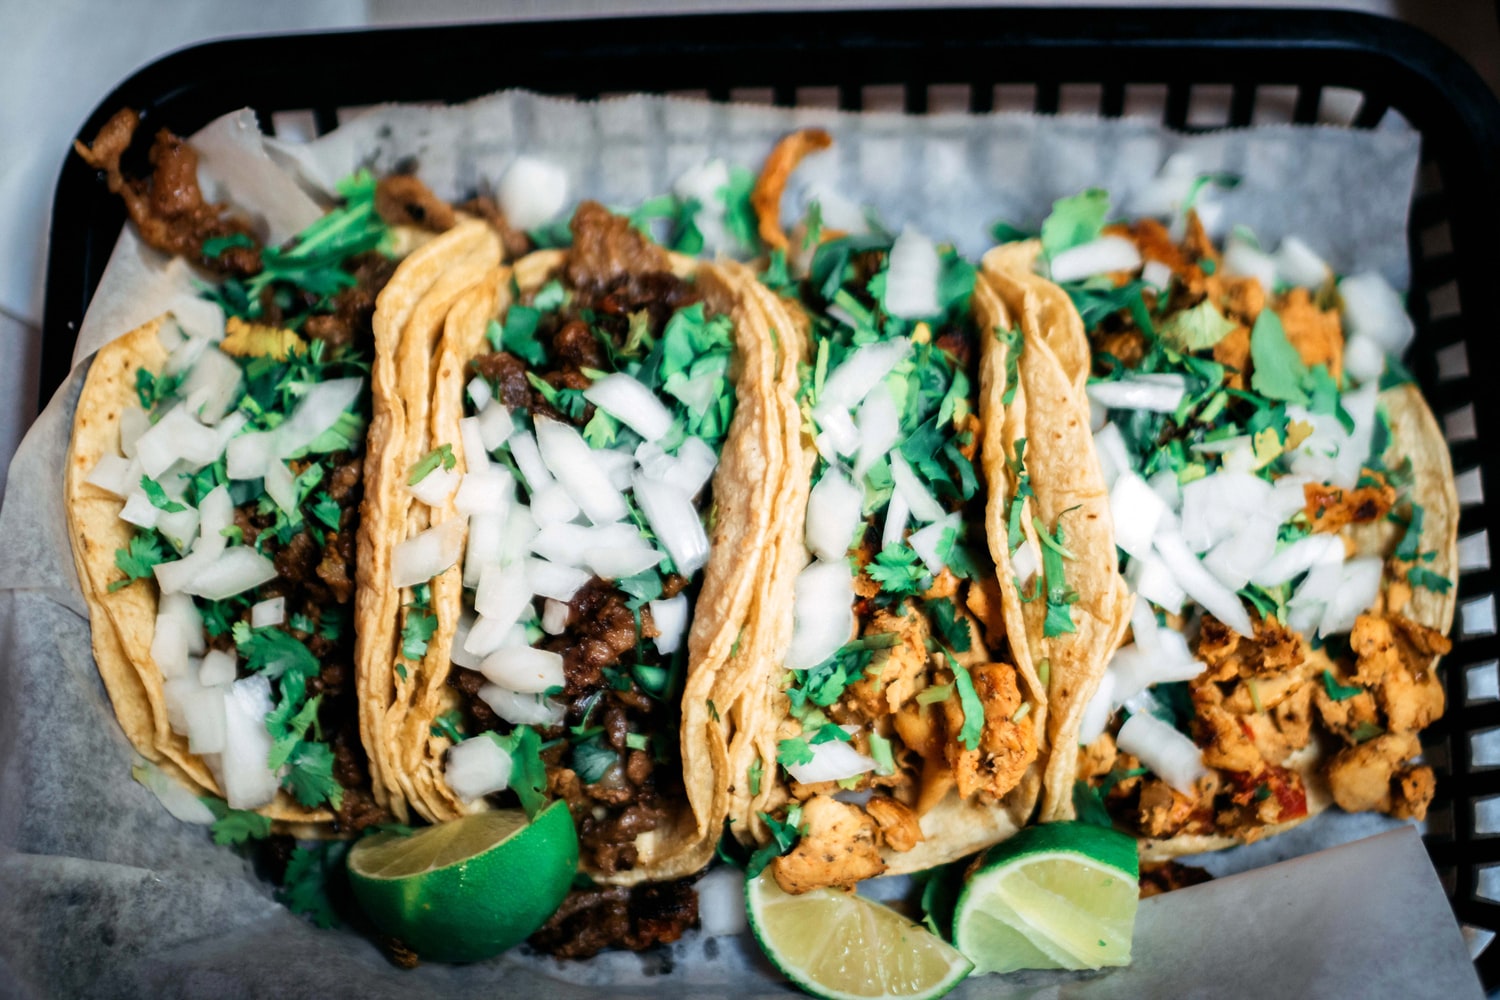 Where to Find the Best Tacos in LA near your VIDA Apartments